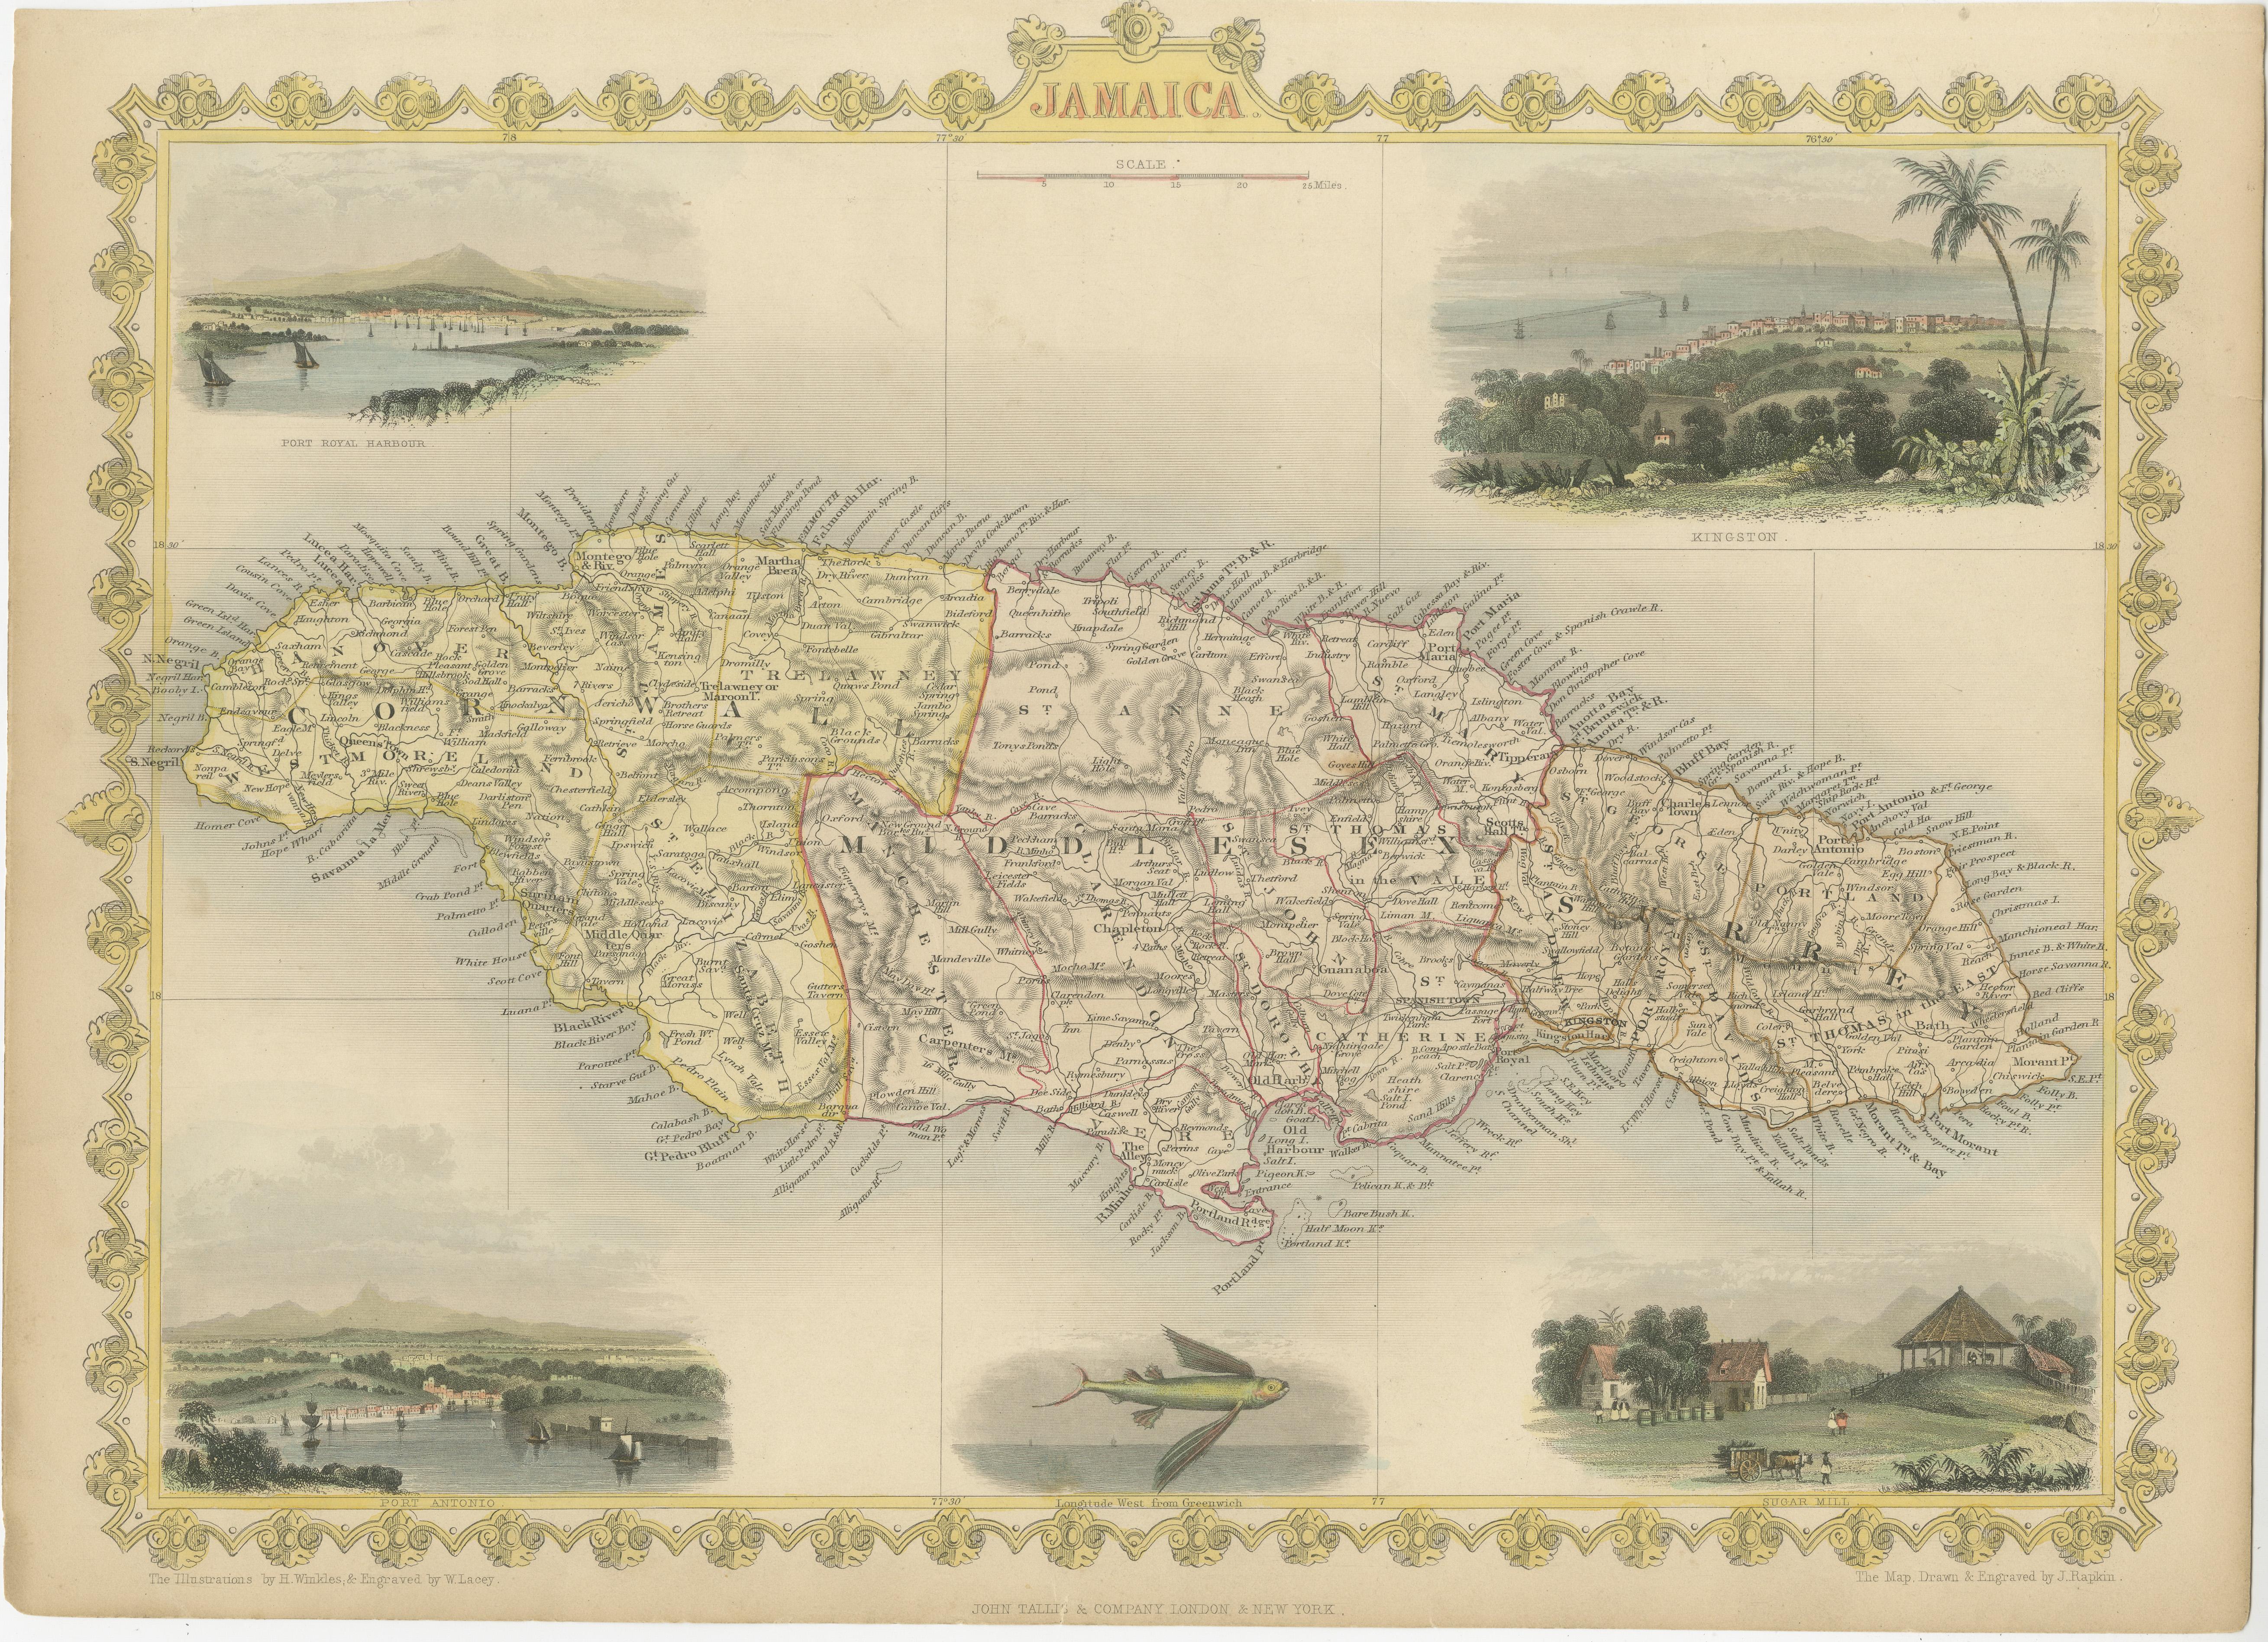 Antique map titled 'Jamaica'. Includes decorative vignettes of Kingston, Port Antonio, Port Royal Harbour and Sugar Mill. Originates from 'The Illustrated Atlas, And Modern History Of The World Geographical, Political, Commercial & Statistical,